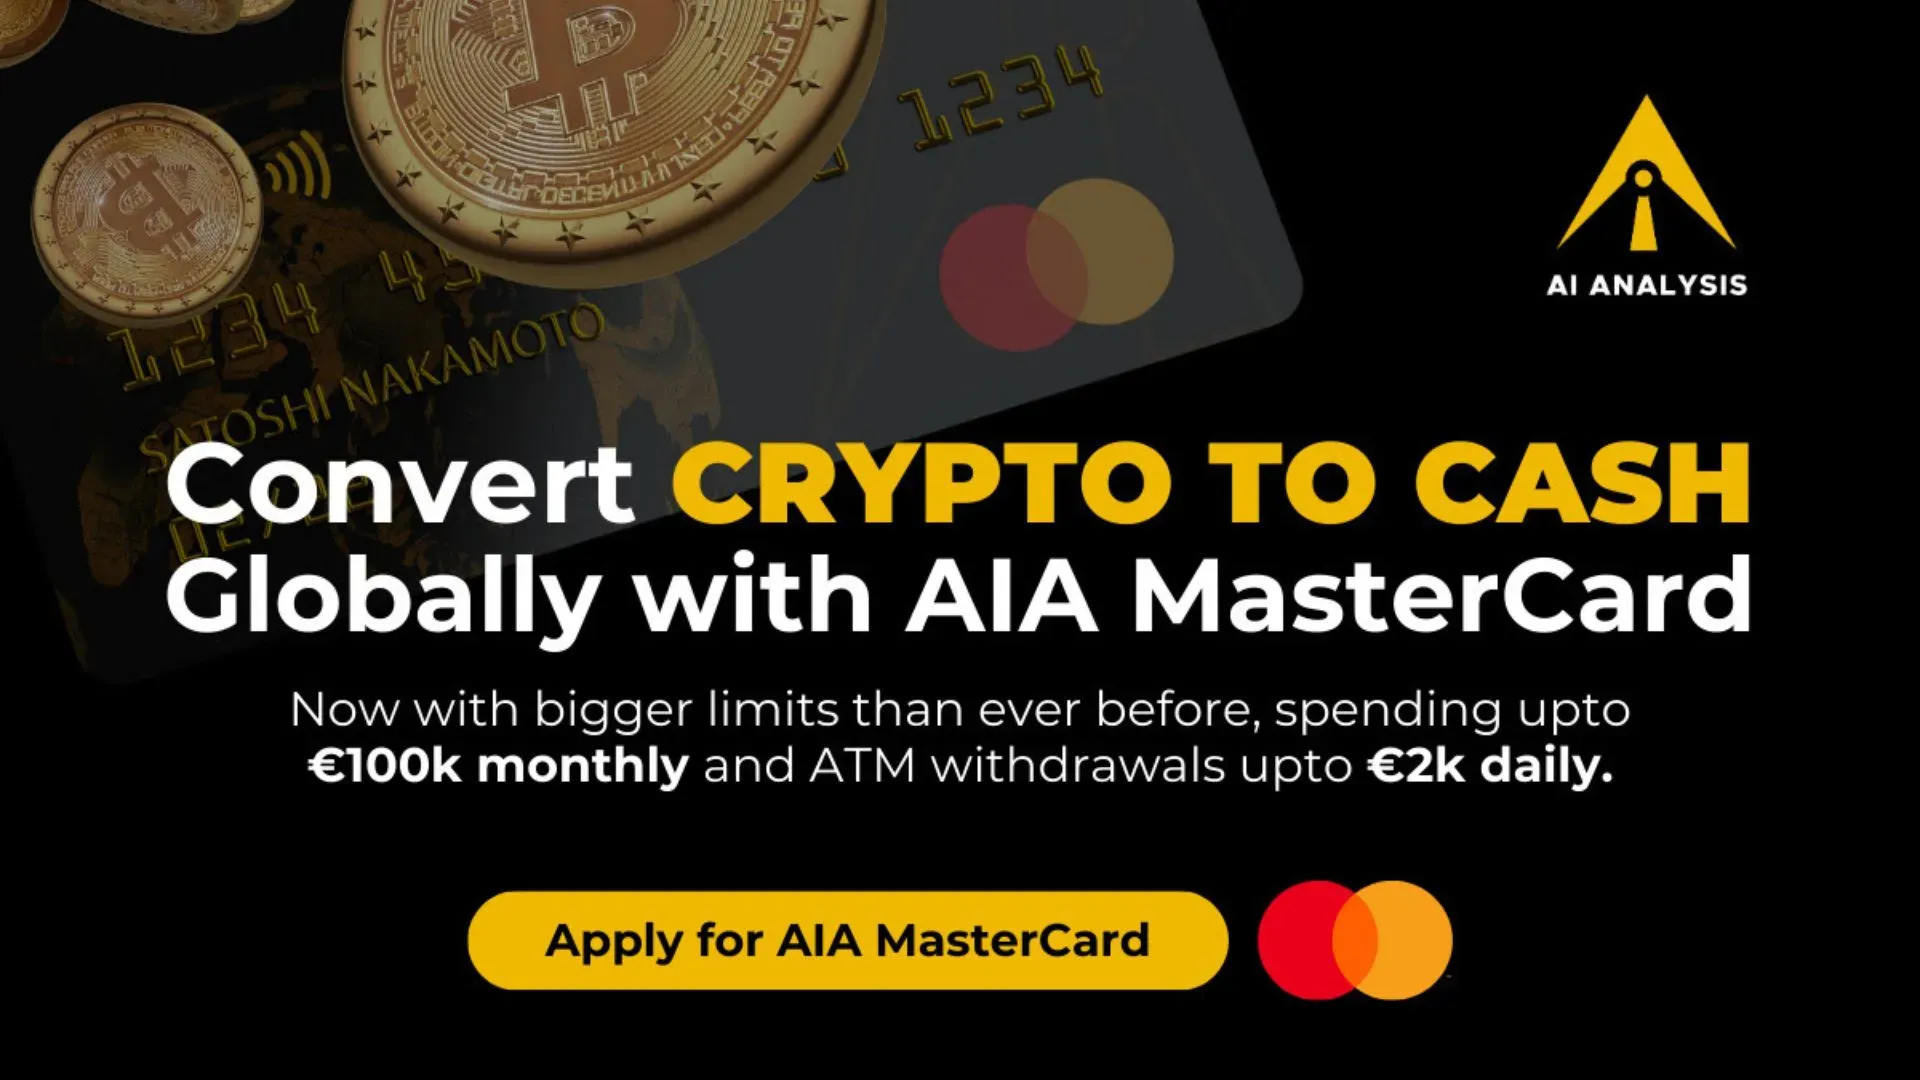 AIA Launches Crypto-To-Fiat Transaction With Mastercard Partnership